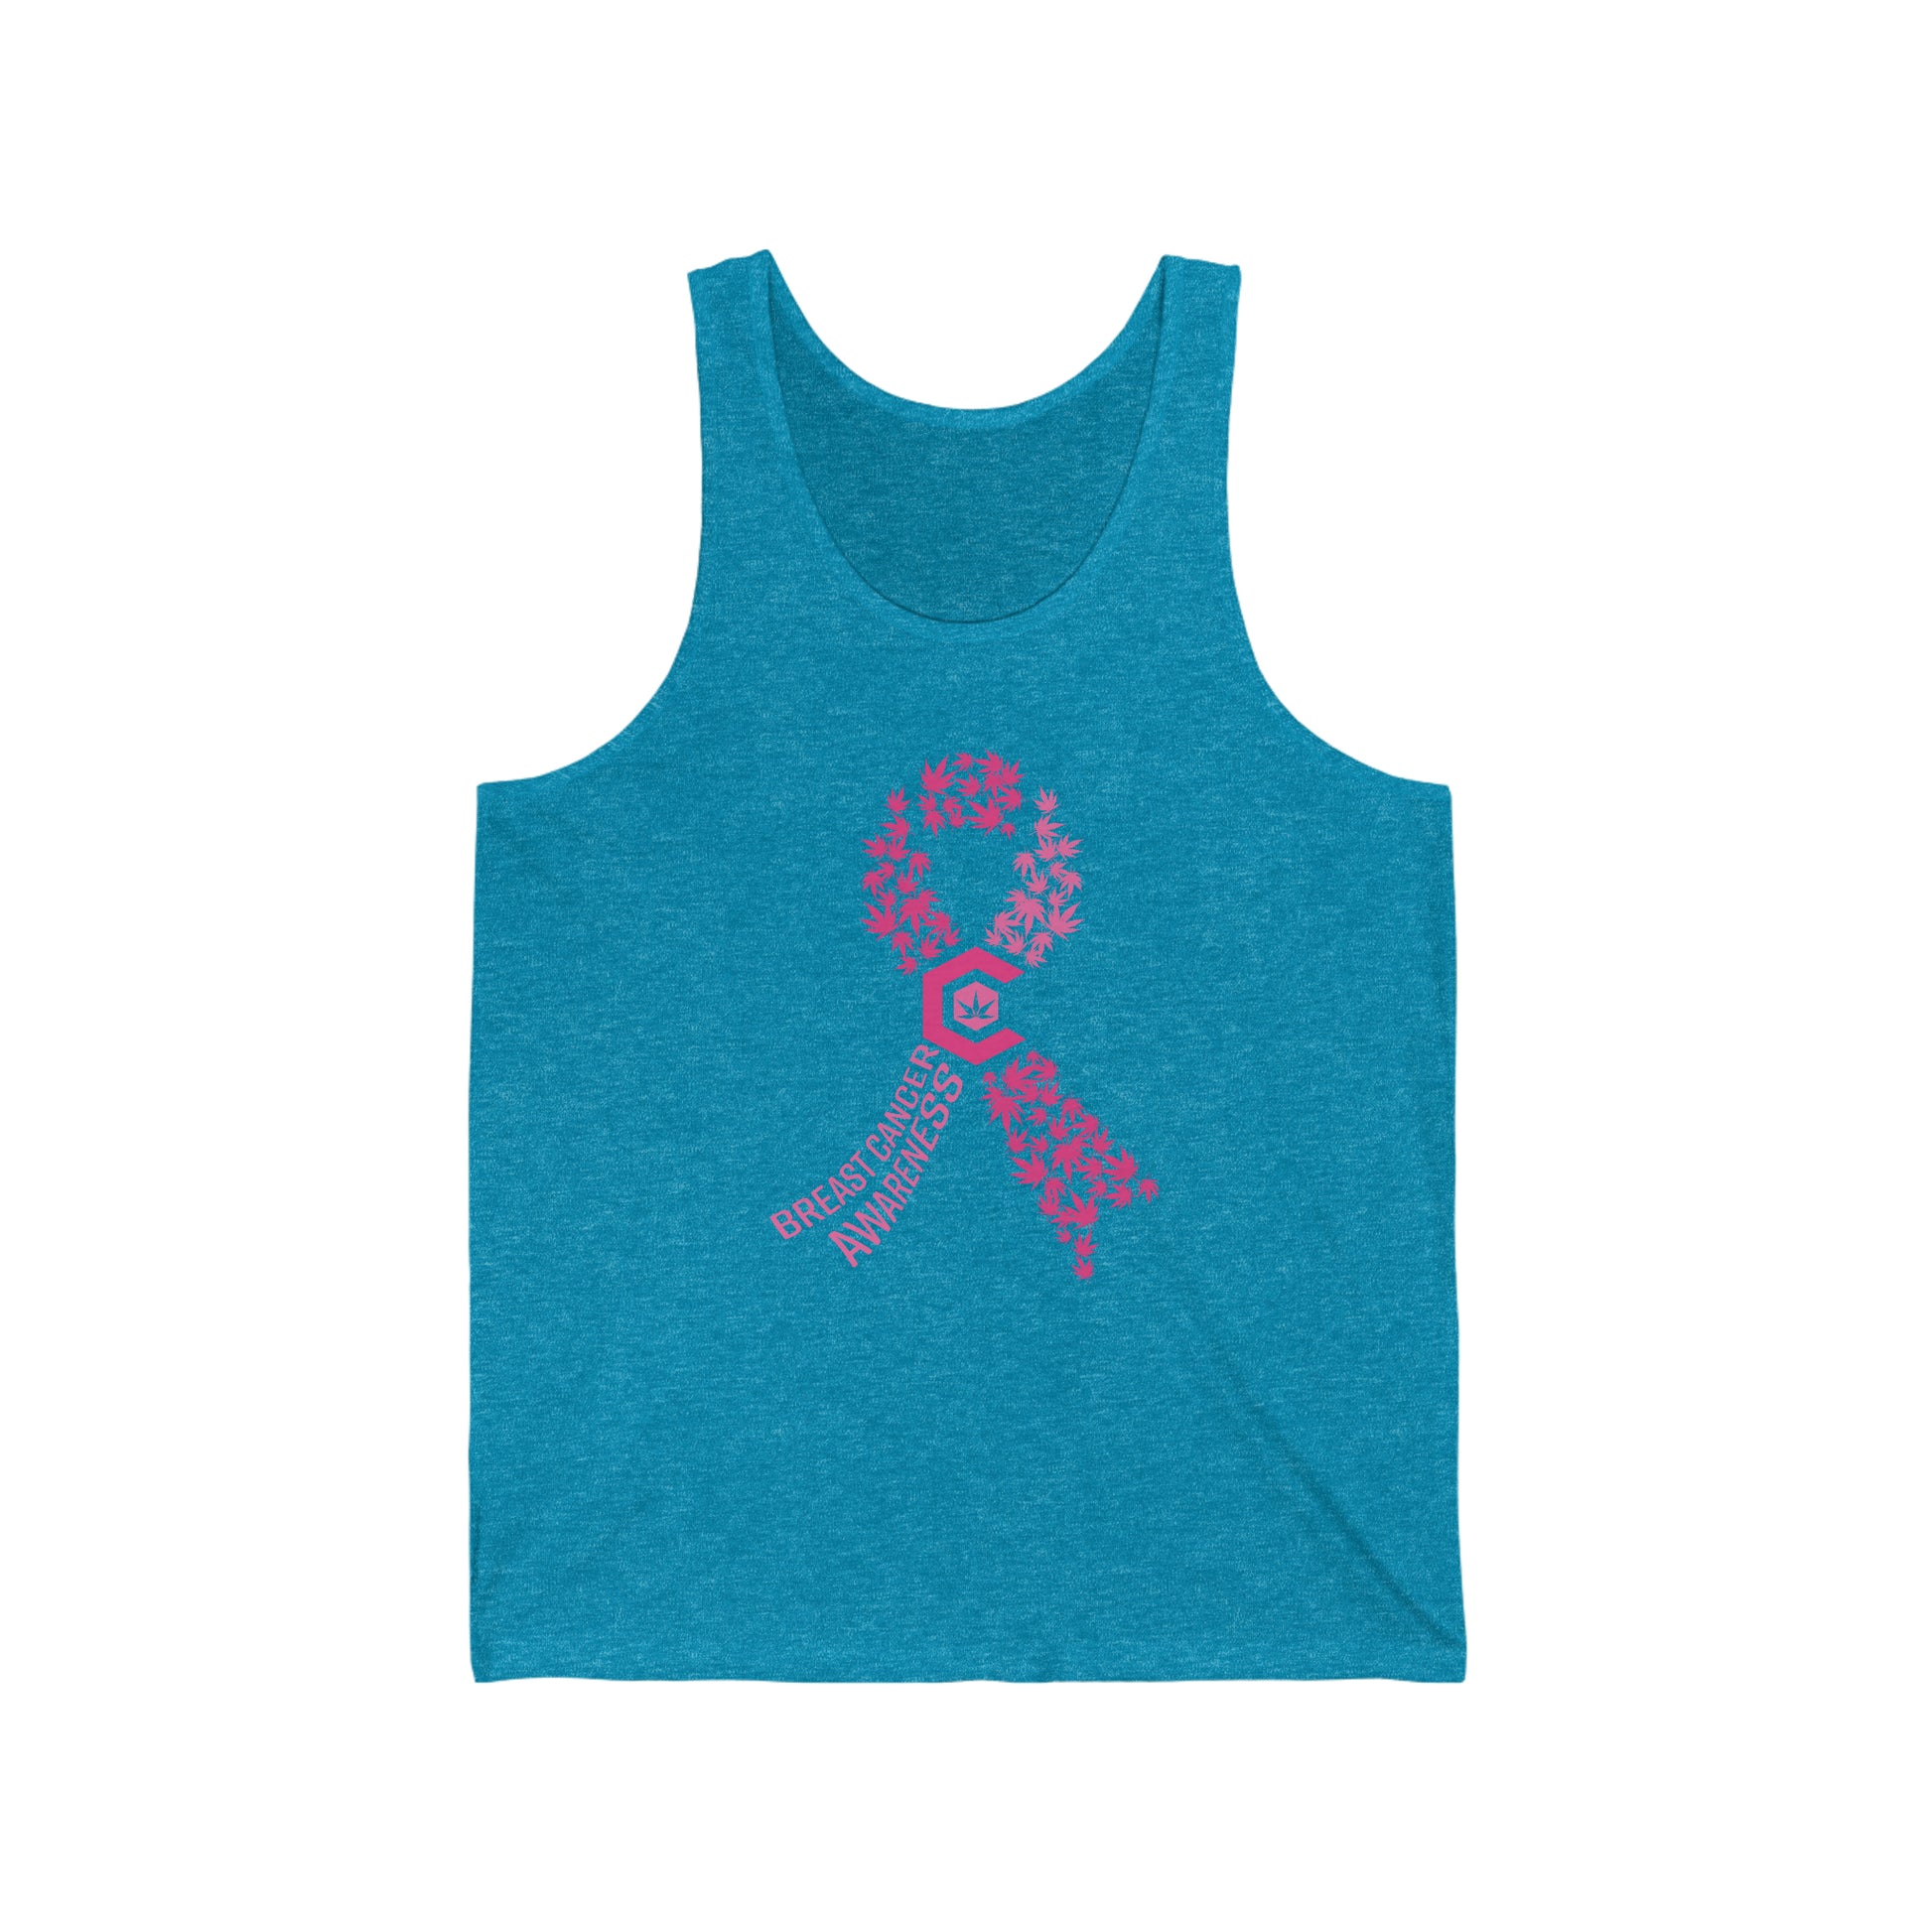 a Breast Cancer Awareness Cannabis Jersey Tank with a pink ribbon on it.